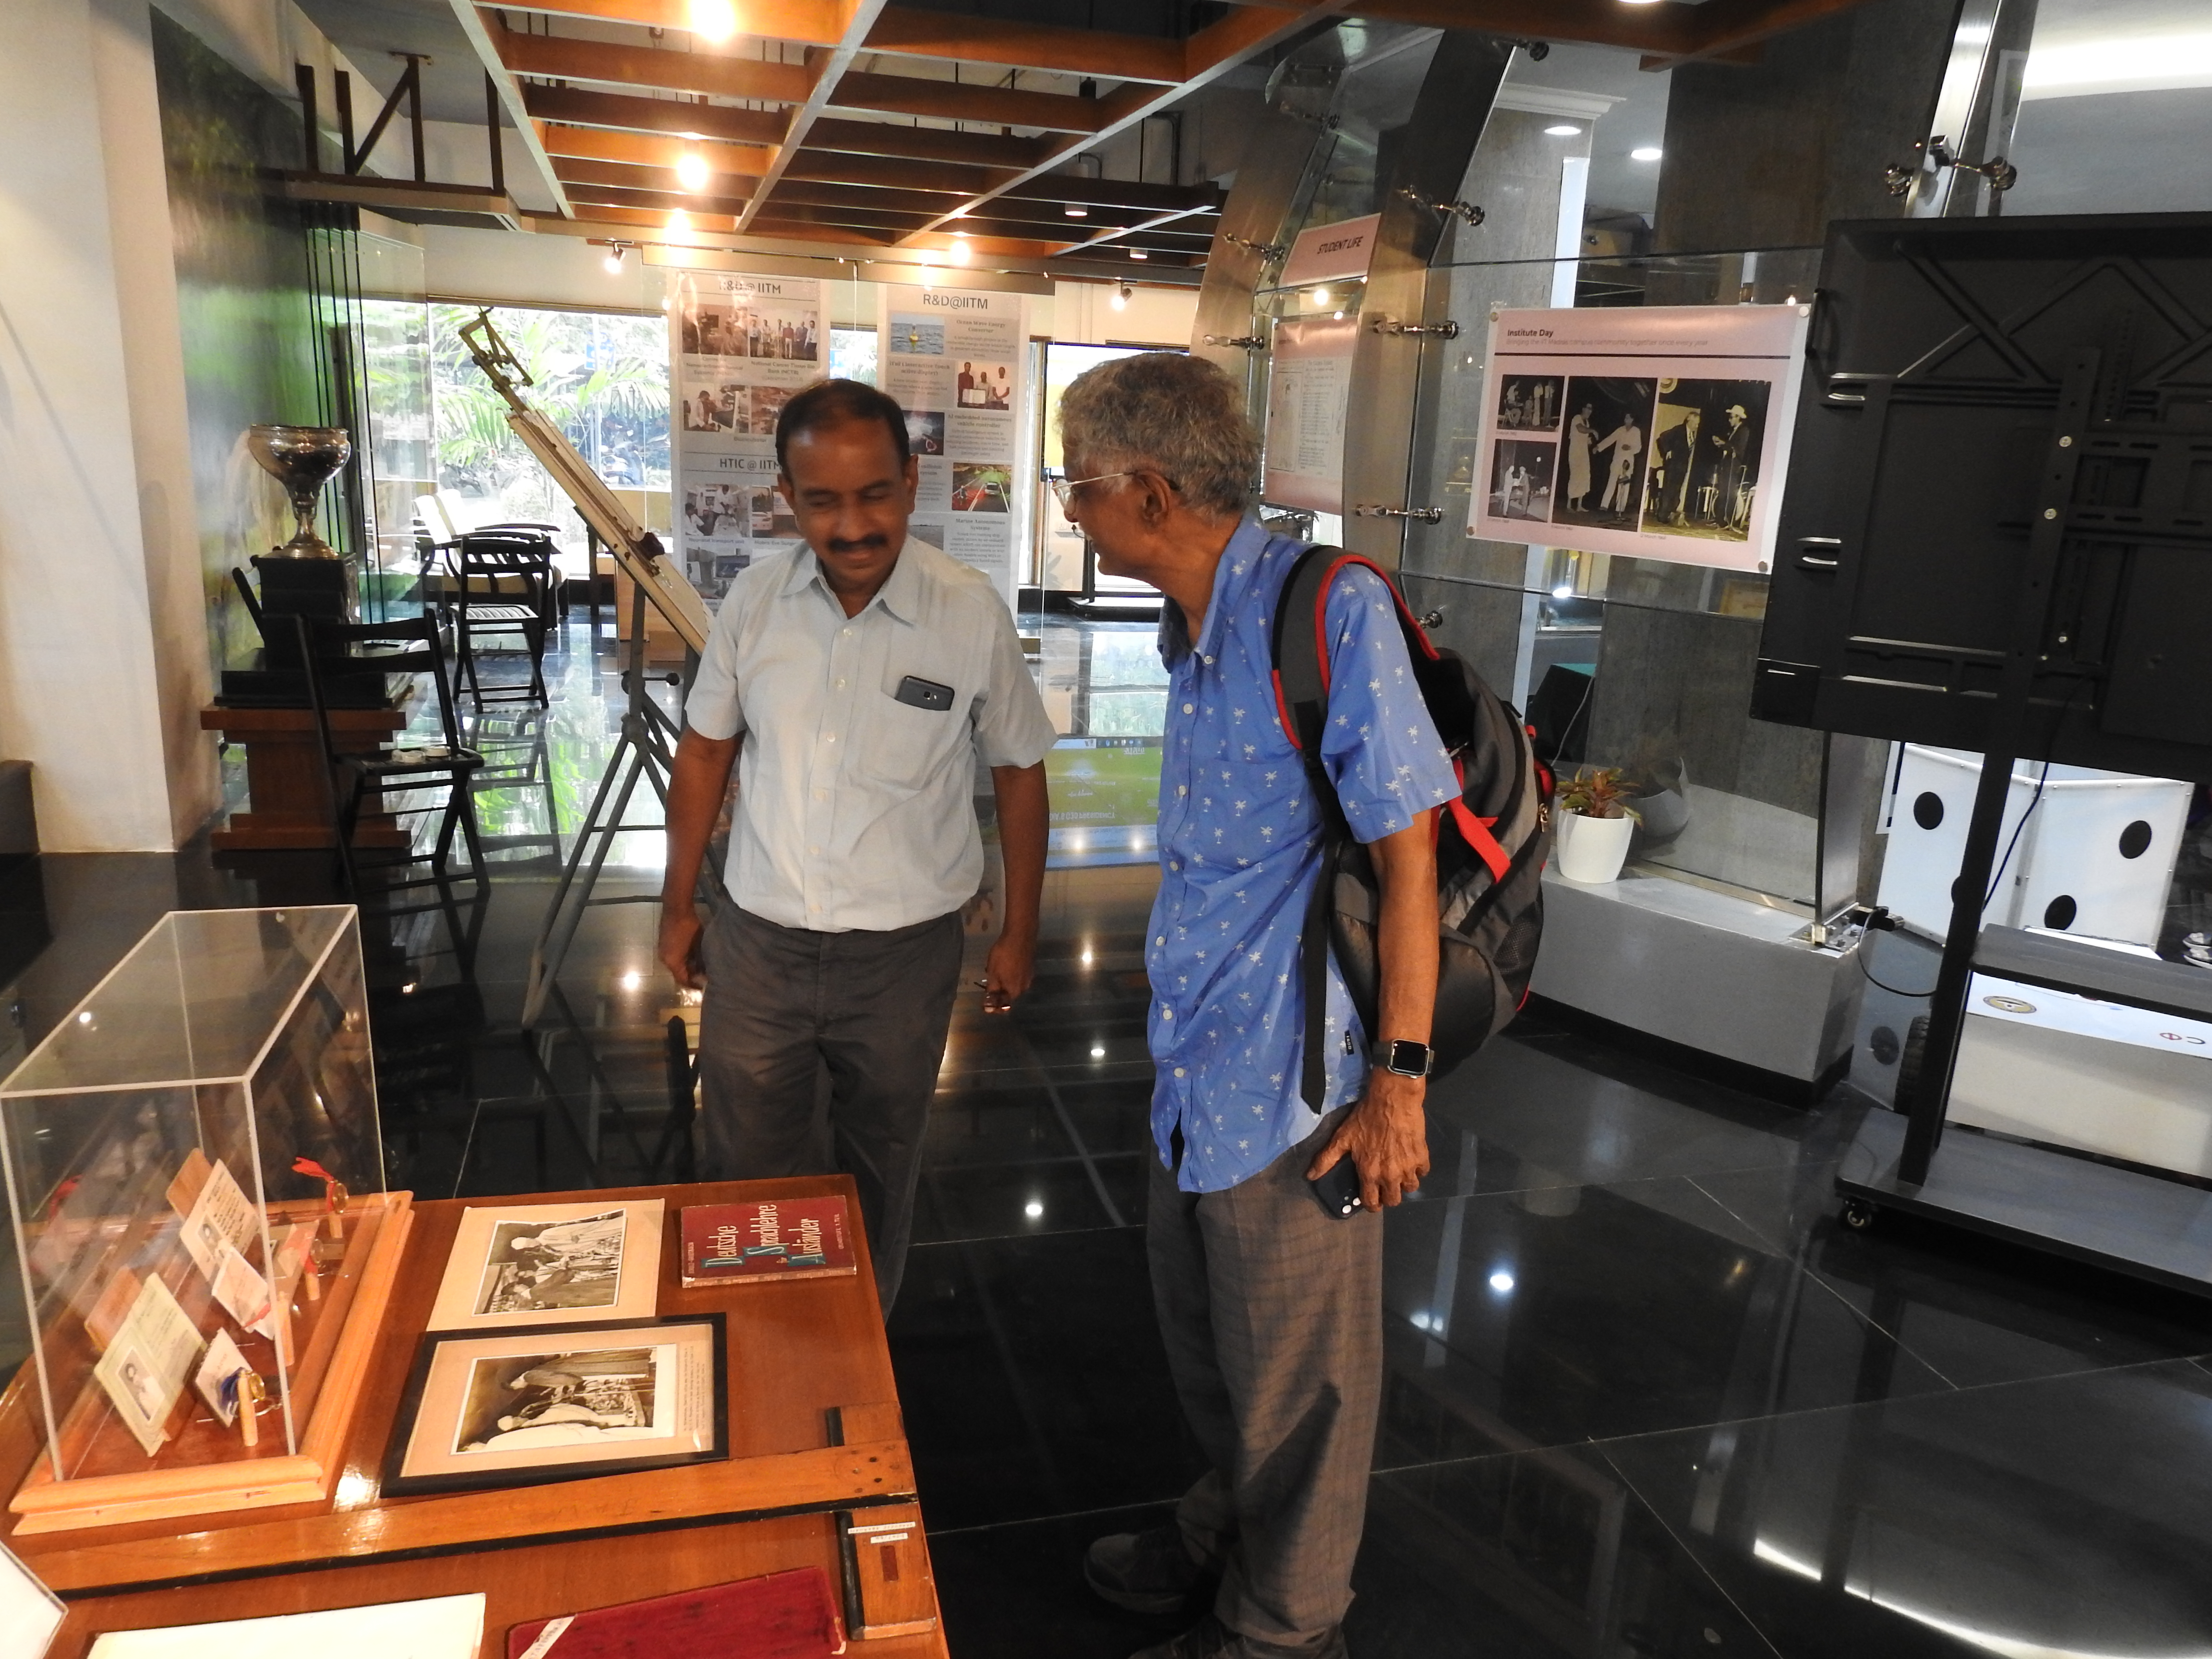 Mr. Thangavelu views exhibits at the Heritage Centre